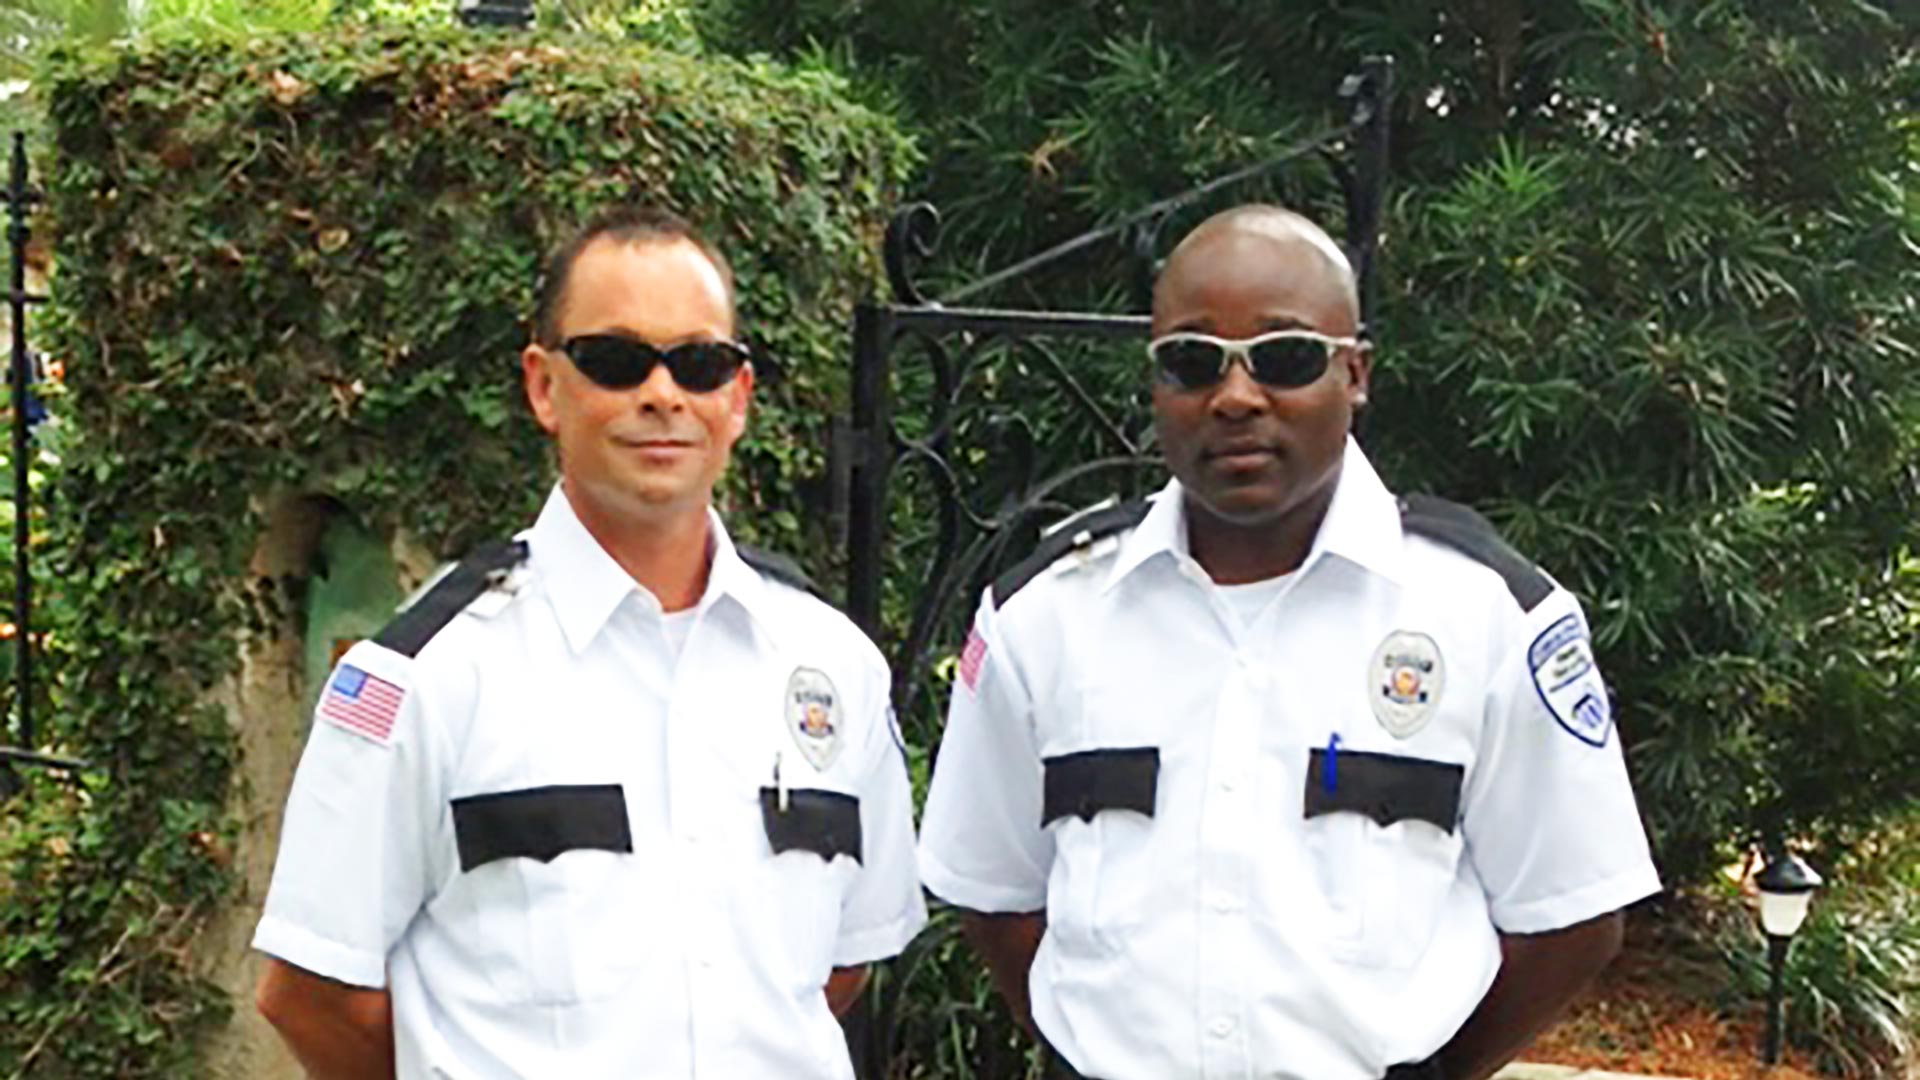 Two security officers for Bales Security who were assigned a residential community post.